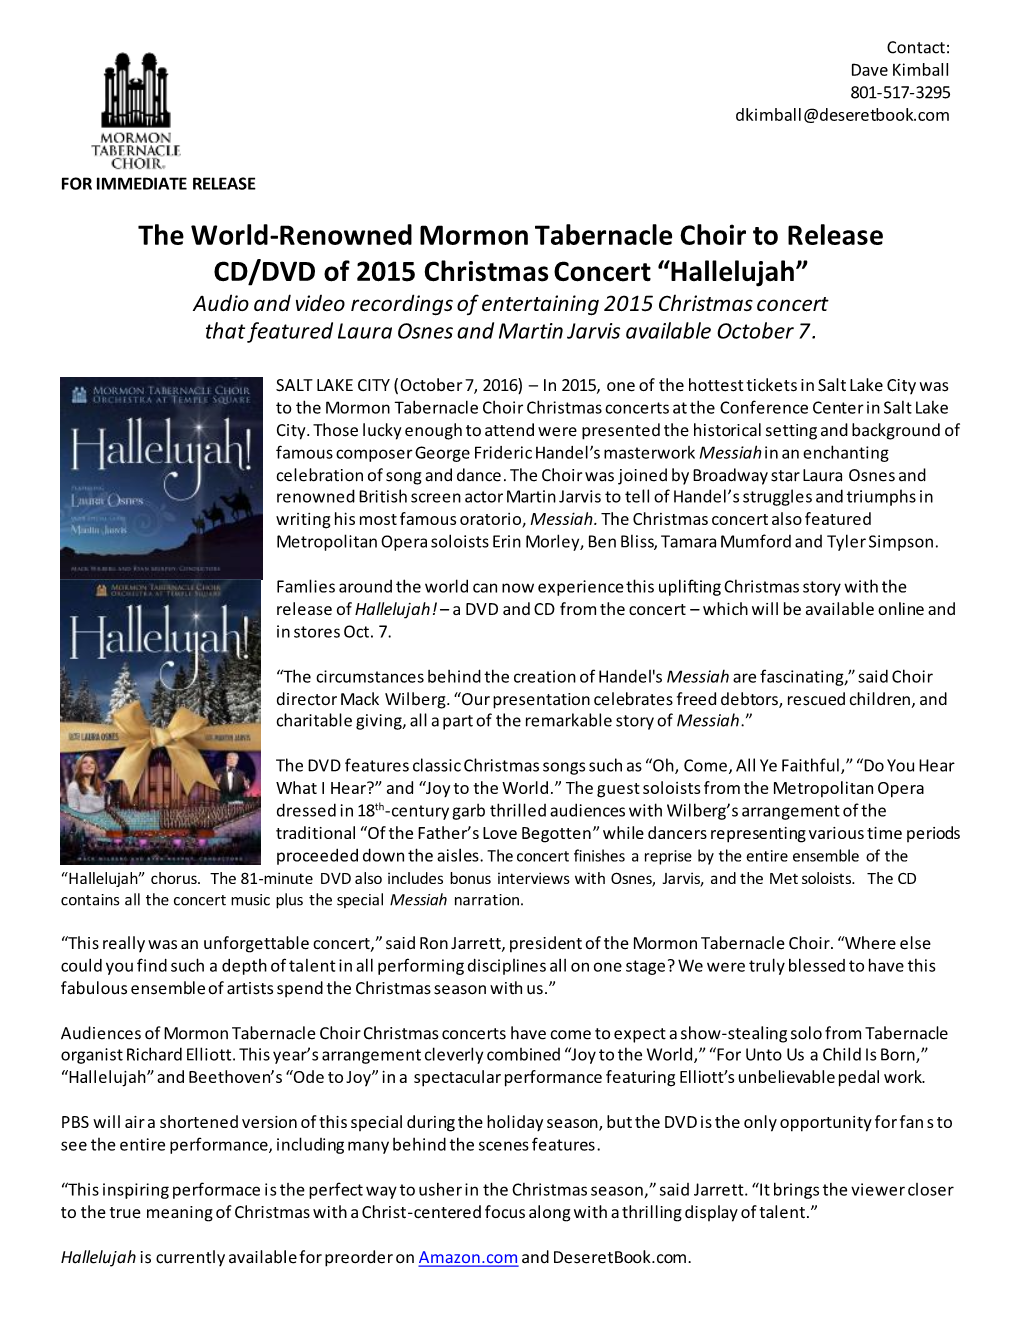 The World-Renowned Mormon Tabernacle Choir to Release CD